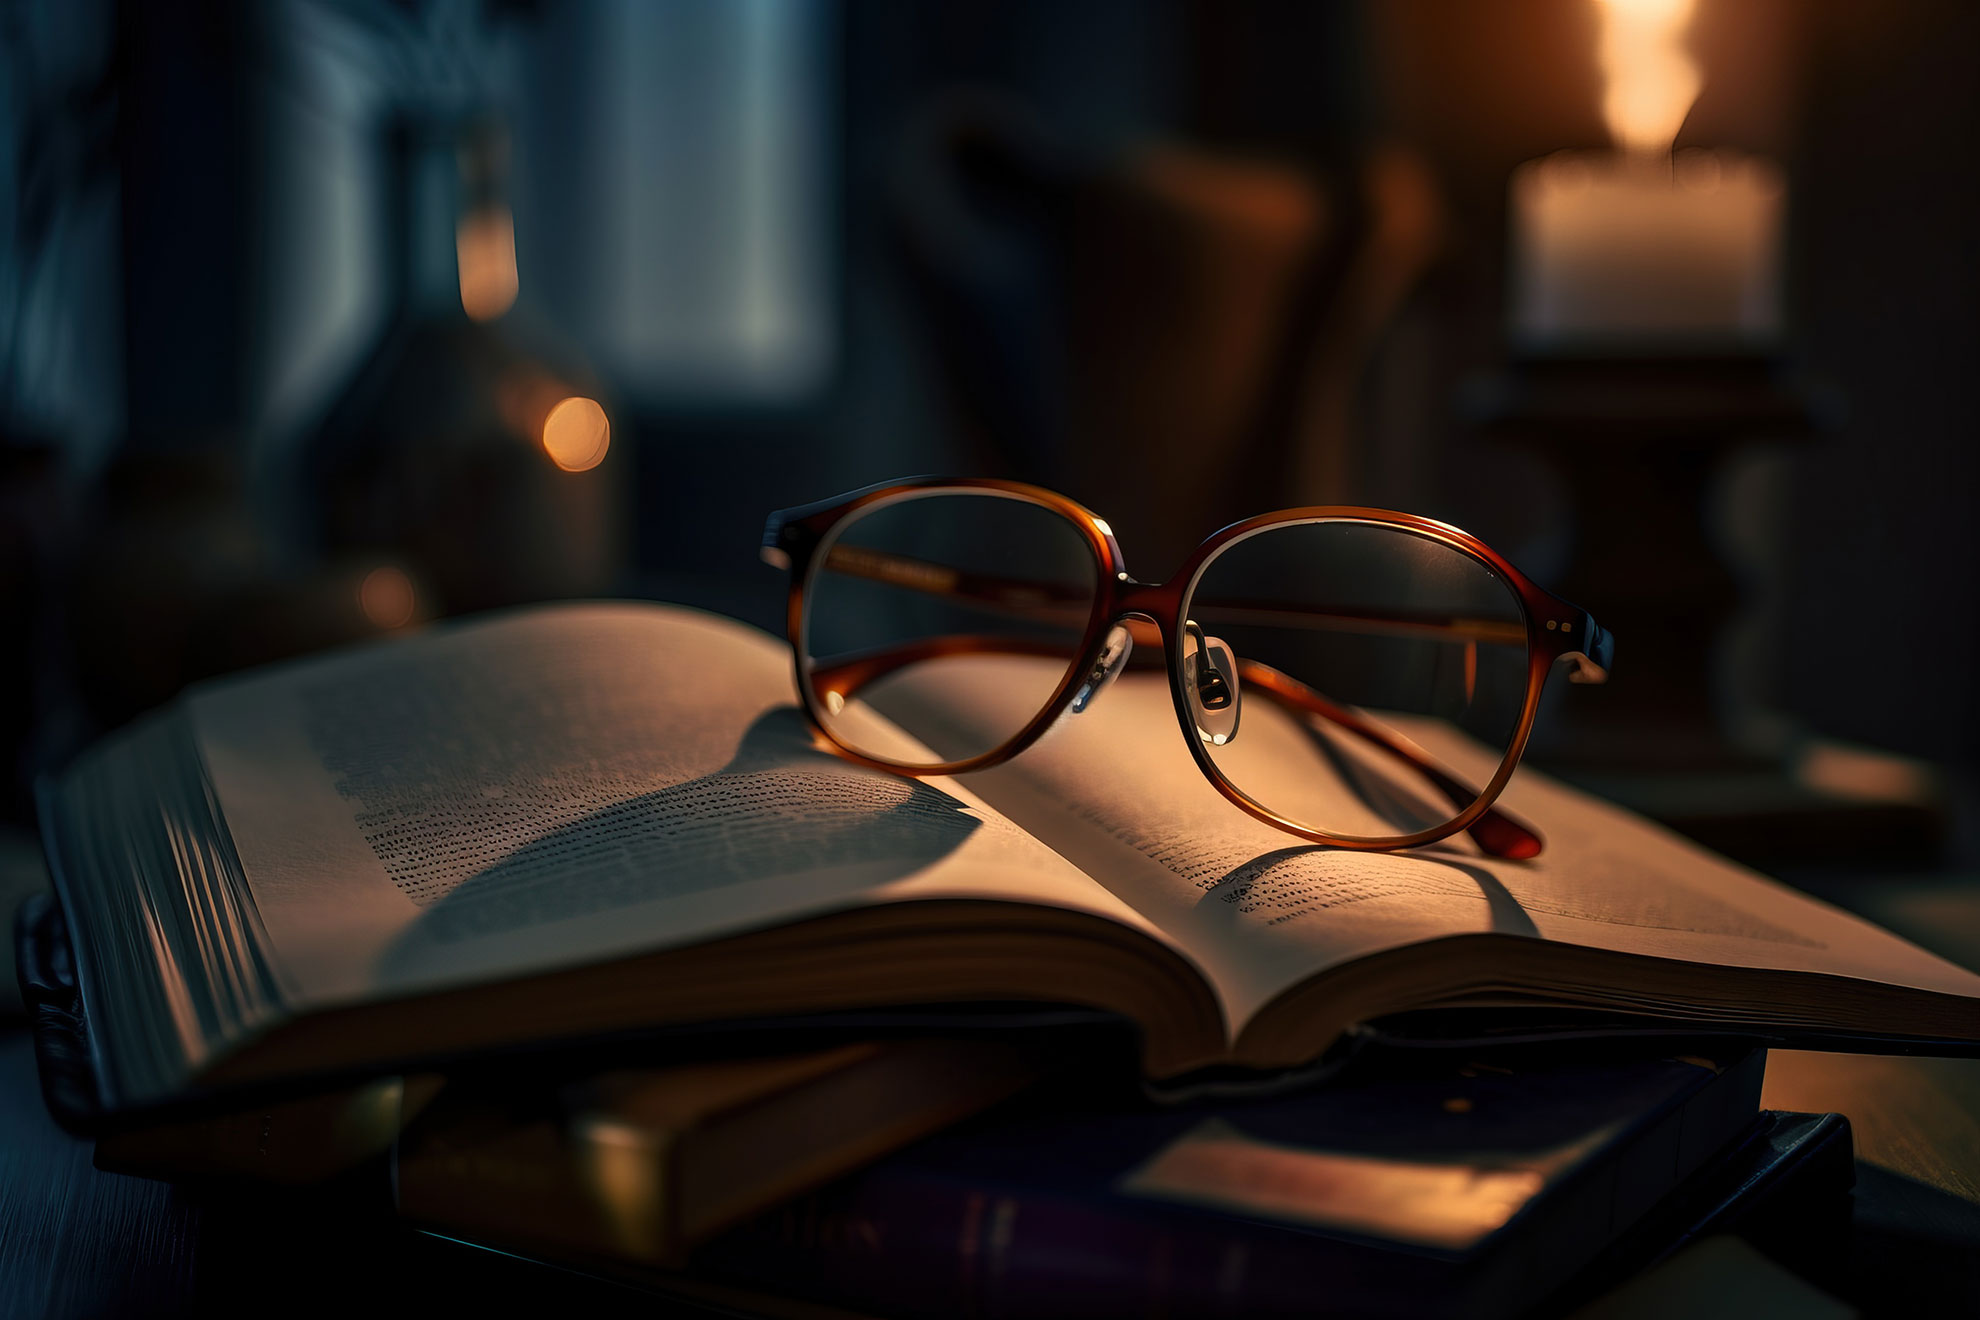 photo of glasses on top of stack of books on desk by candlight